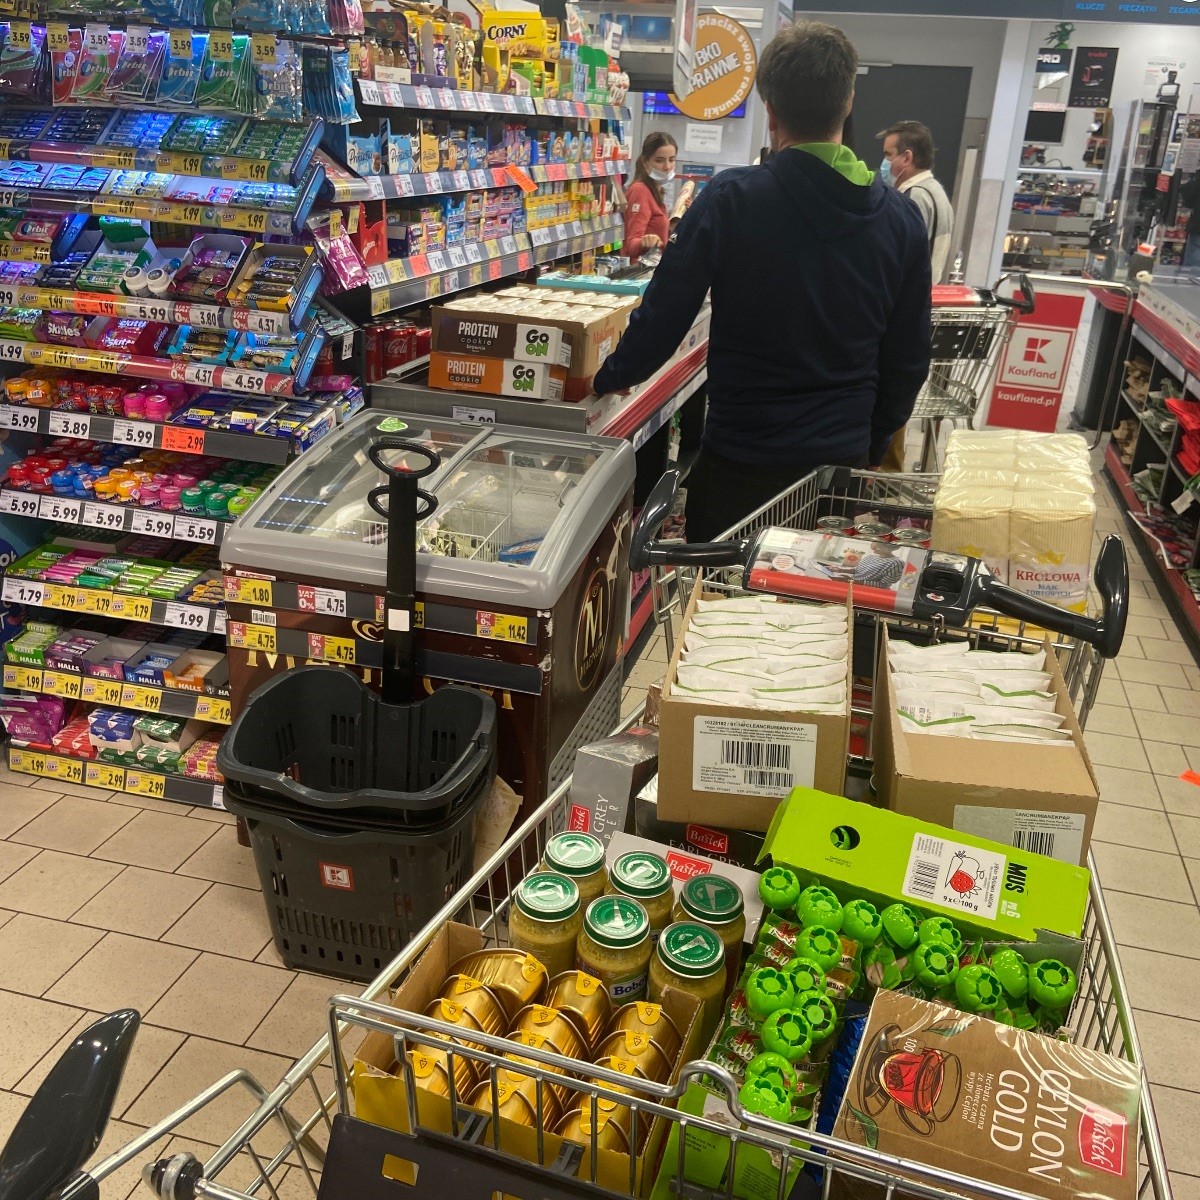 Here is our "caravan" of groceries to bring to the border